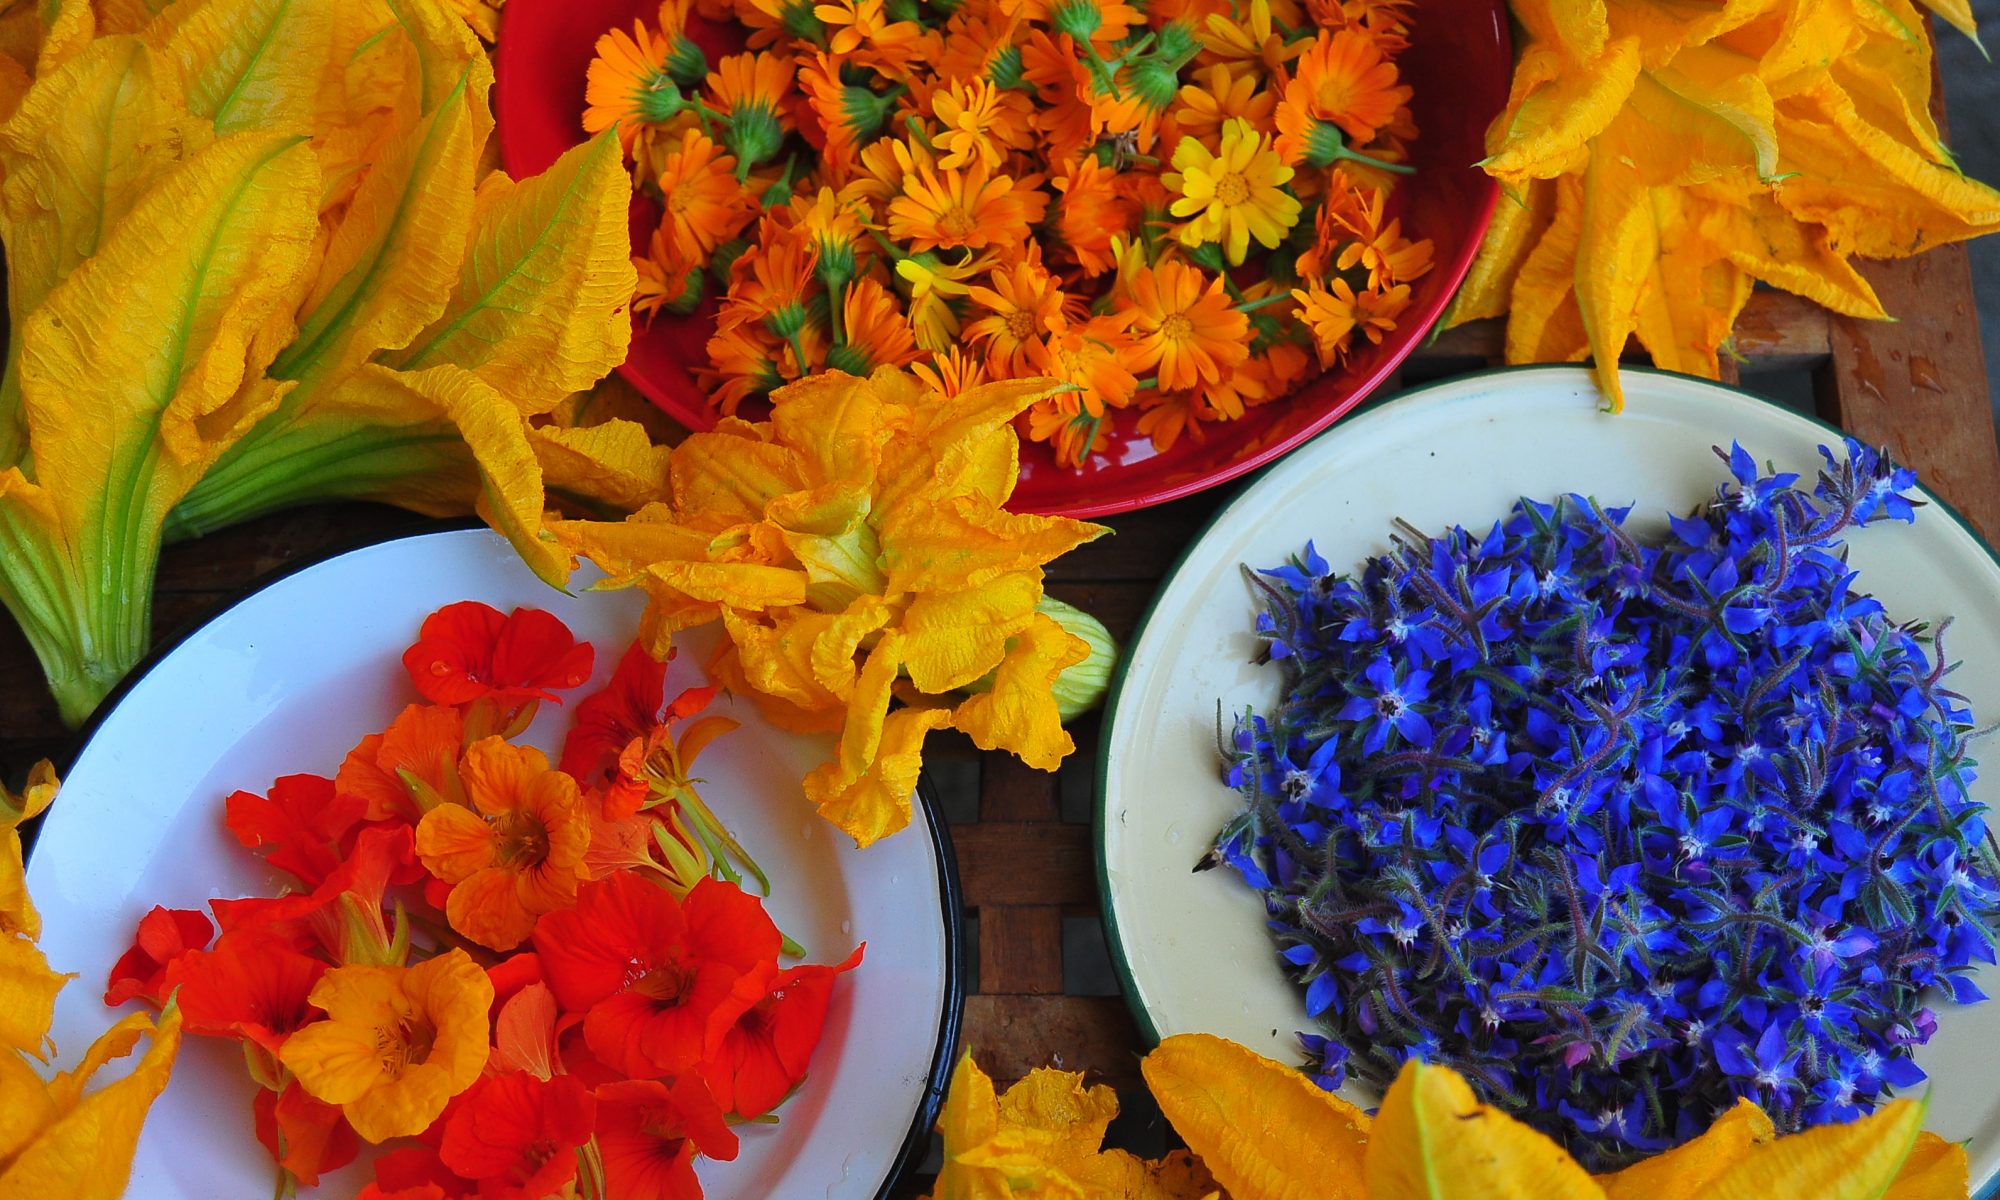 edible flowers collected daily